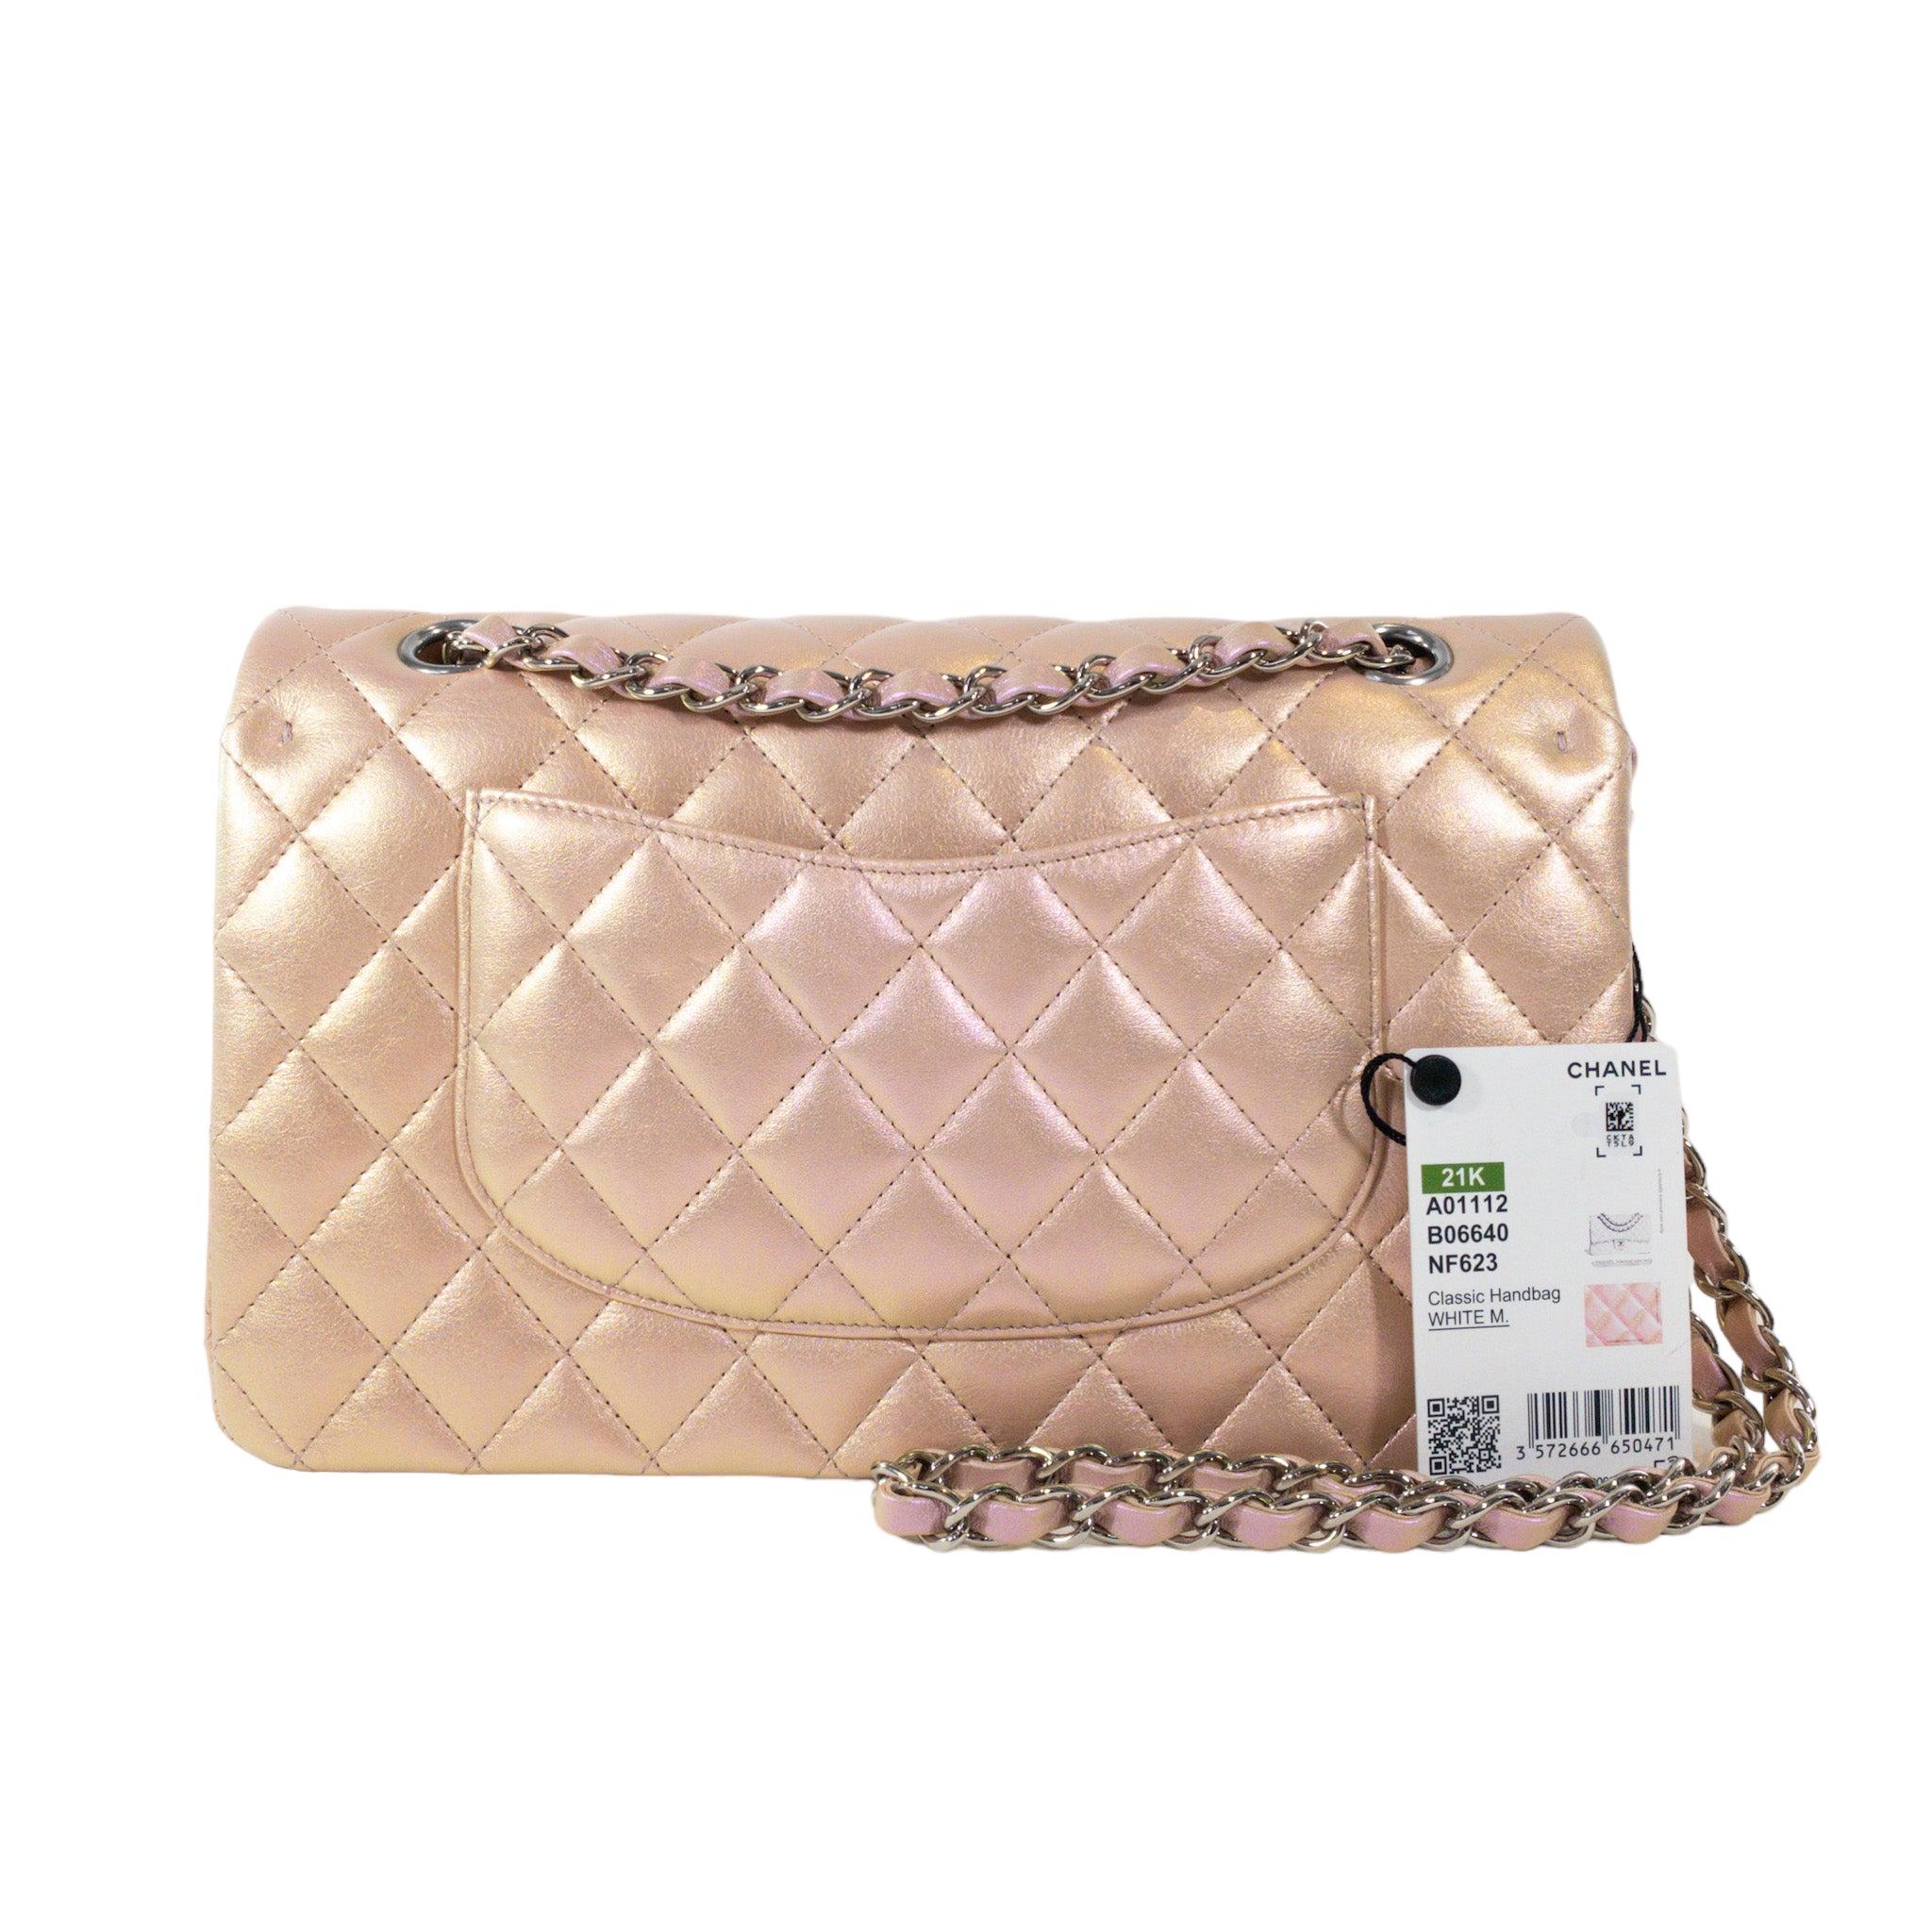 Chanel Pink Iridescent Medium Flap SHW Bag

This is an authentic Chanel Medium Classic Flap. The bag has a flap closure with a Double C logo turn lock. The interior is leather and includes one slip pocket and one zip pocket, it also has one exterior